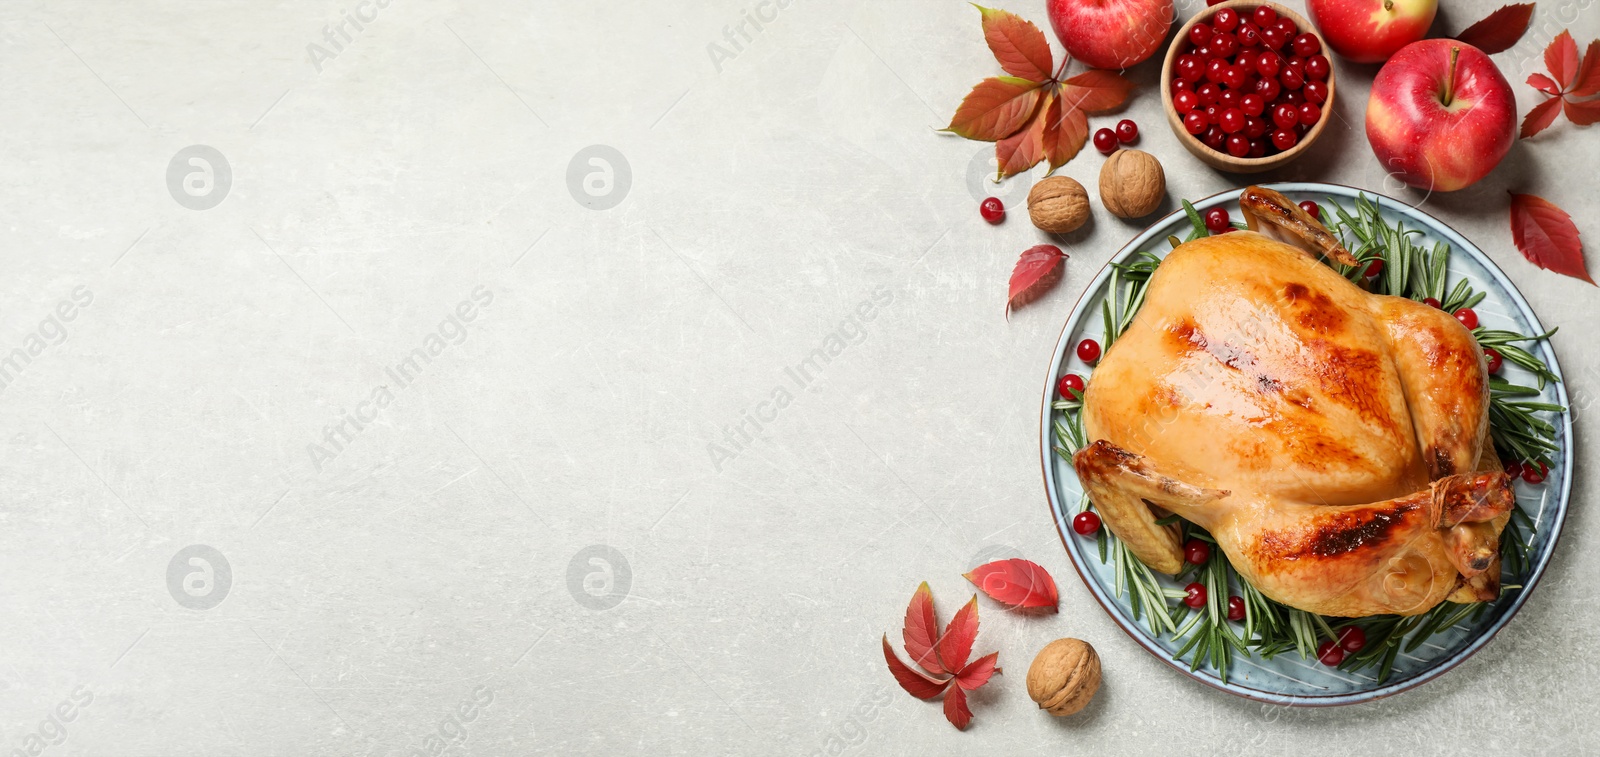 Image of Happy Thanksgiving Day, banner design. Traditional cooked turkey and autumn decor on light table, flat lay with space for text